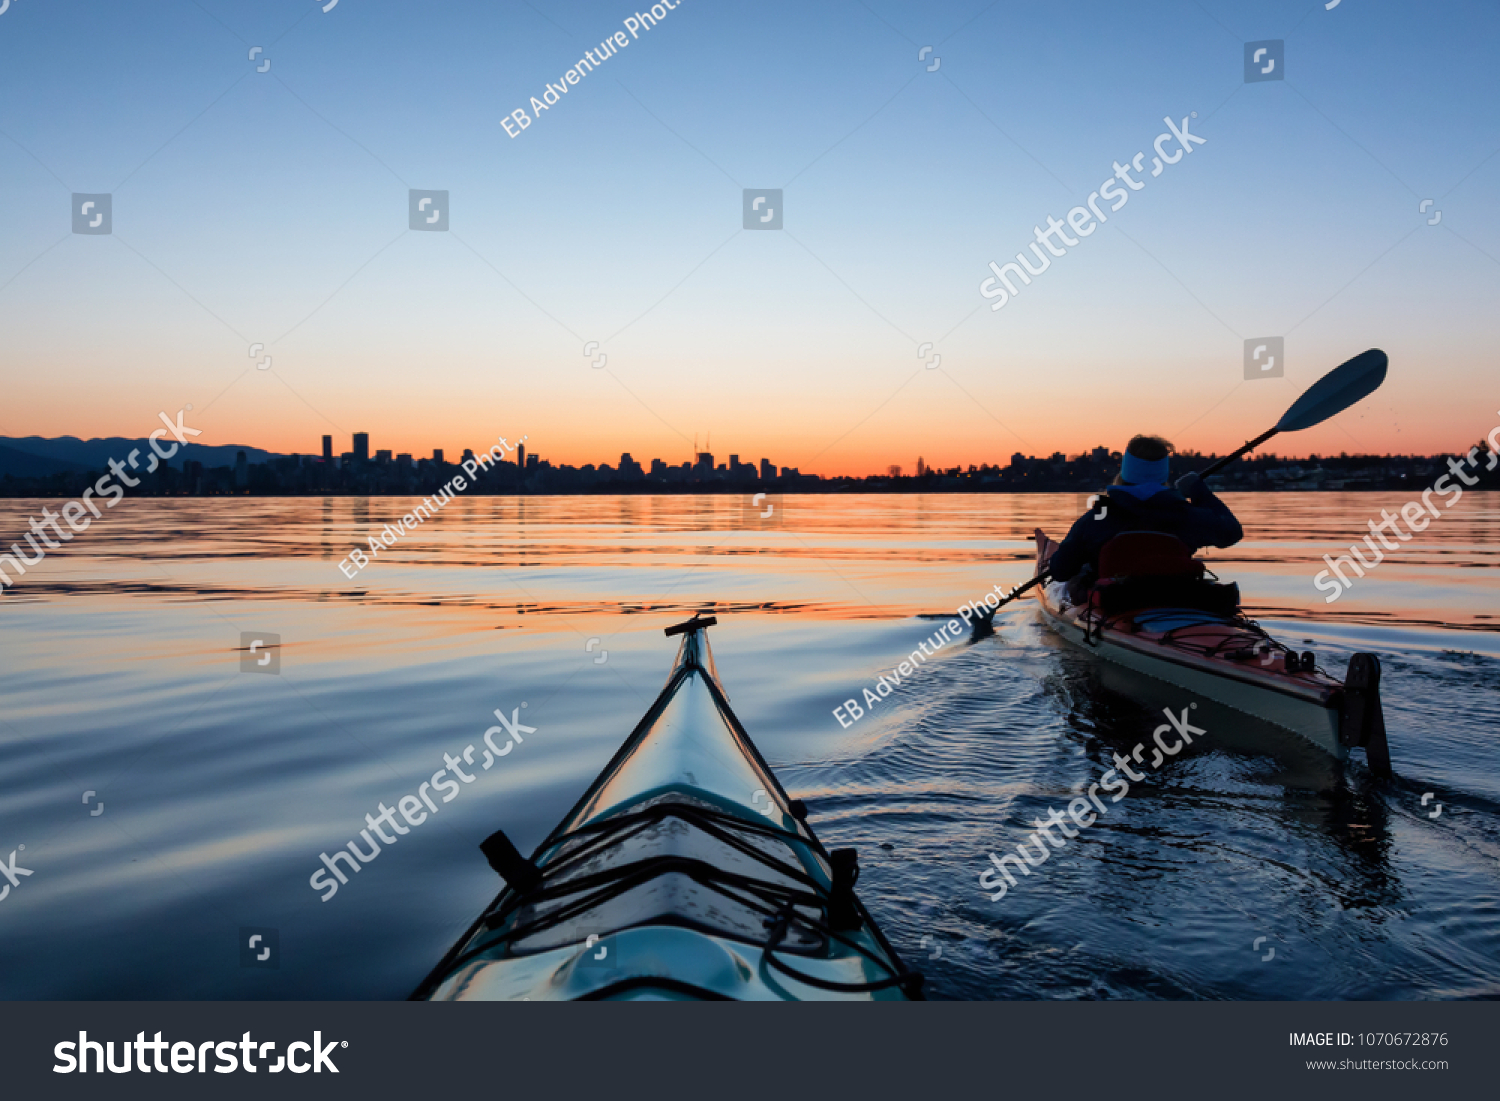 Adventurous Girl Sea Kayaking during a vibrant winter sunrise with City Skyline in Background. Taken in Downtown Vancouver, British Columbia, Canada. Concept: Adventure, Holiday, Vacation, Sport #1070672876